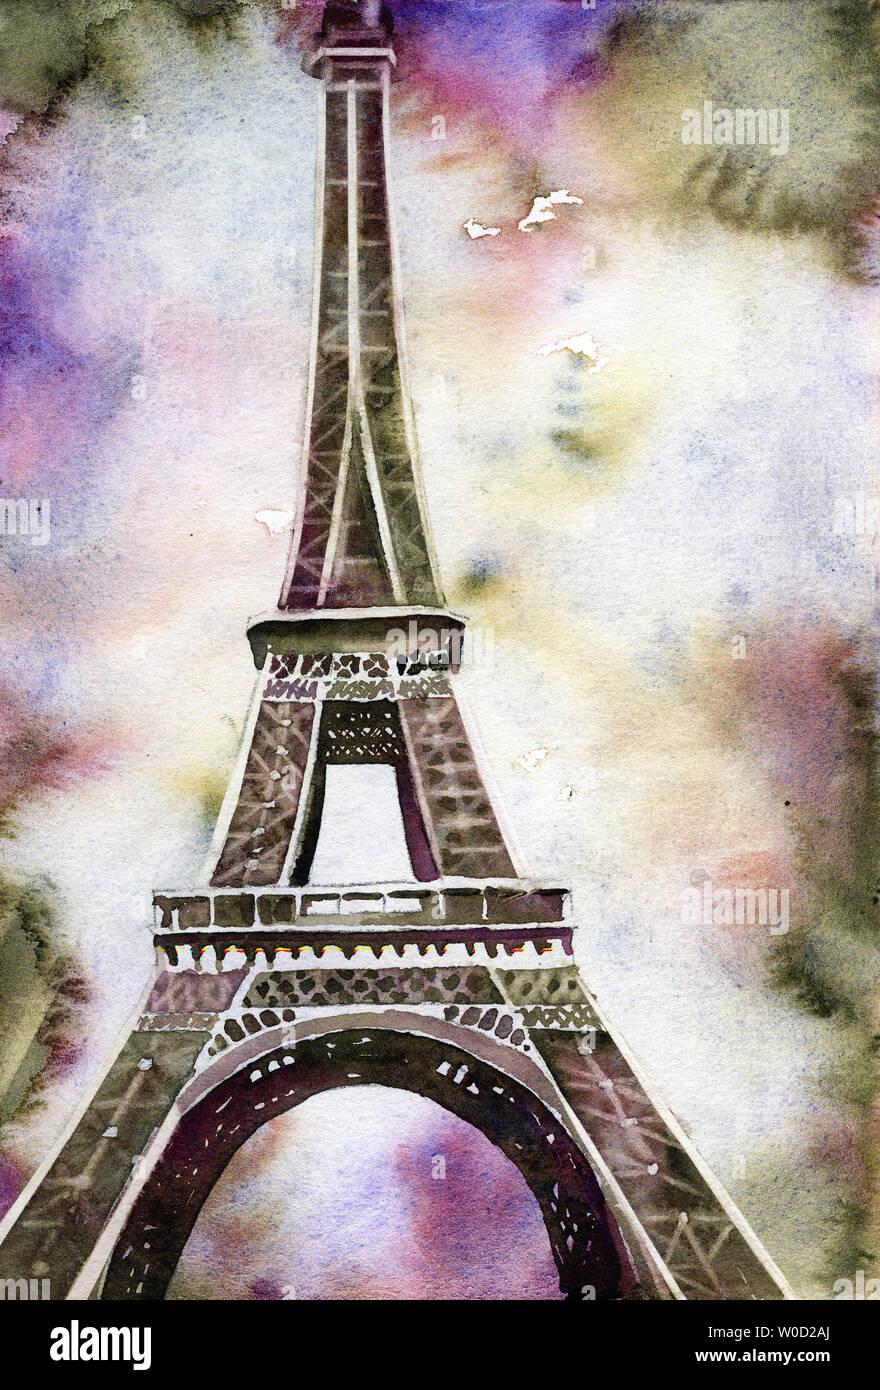 Fine art watercolor painting of portion of the Eiffel Tower at sunset- Paris, France Stock Photo